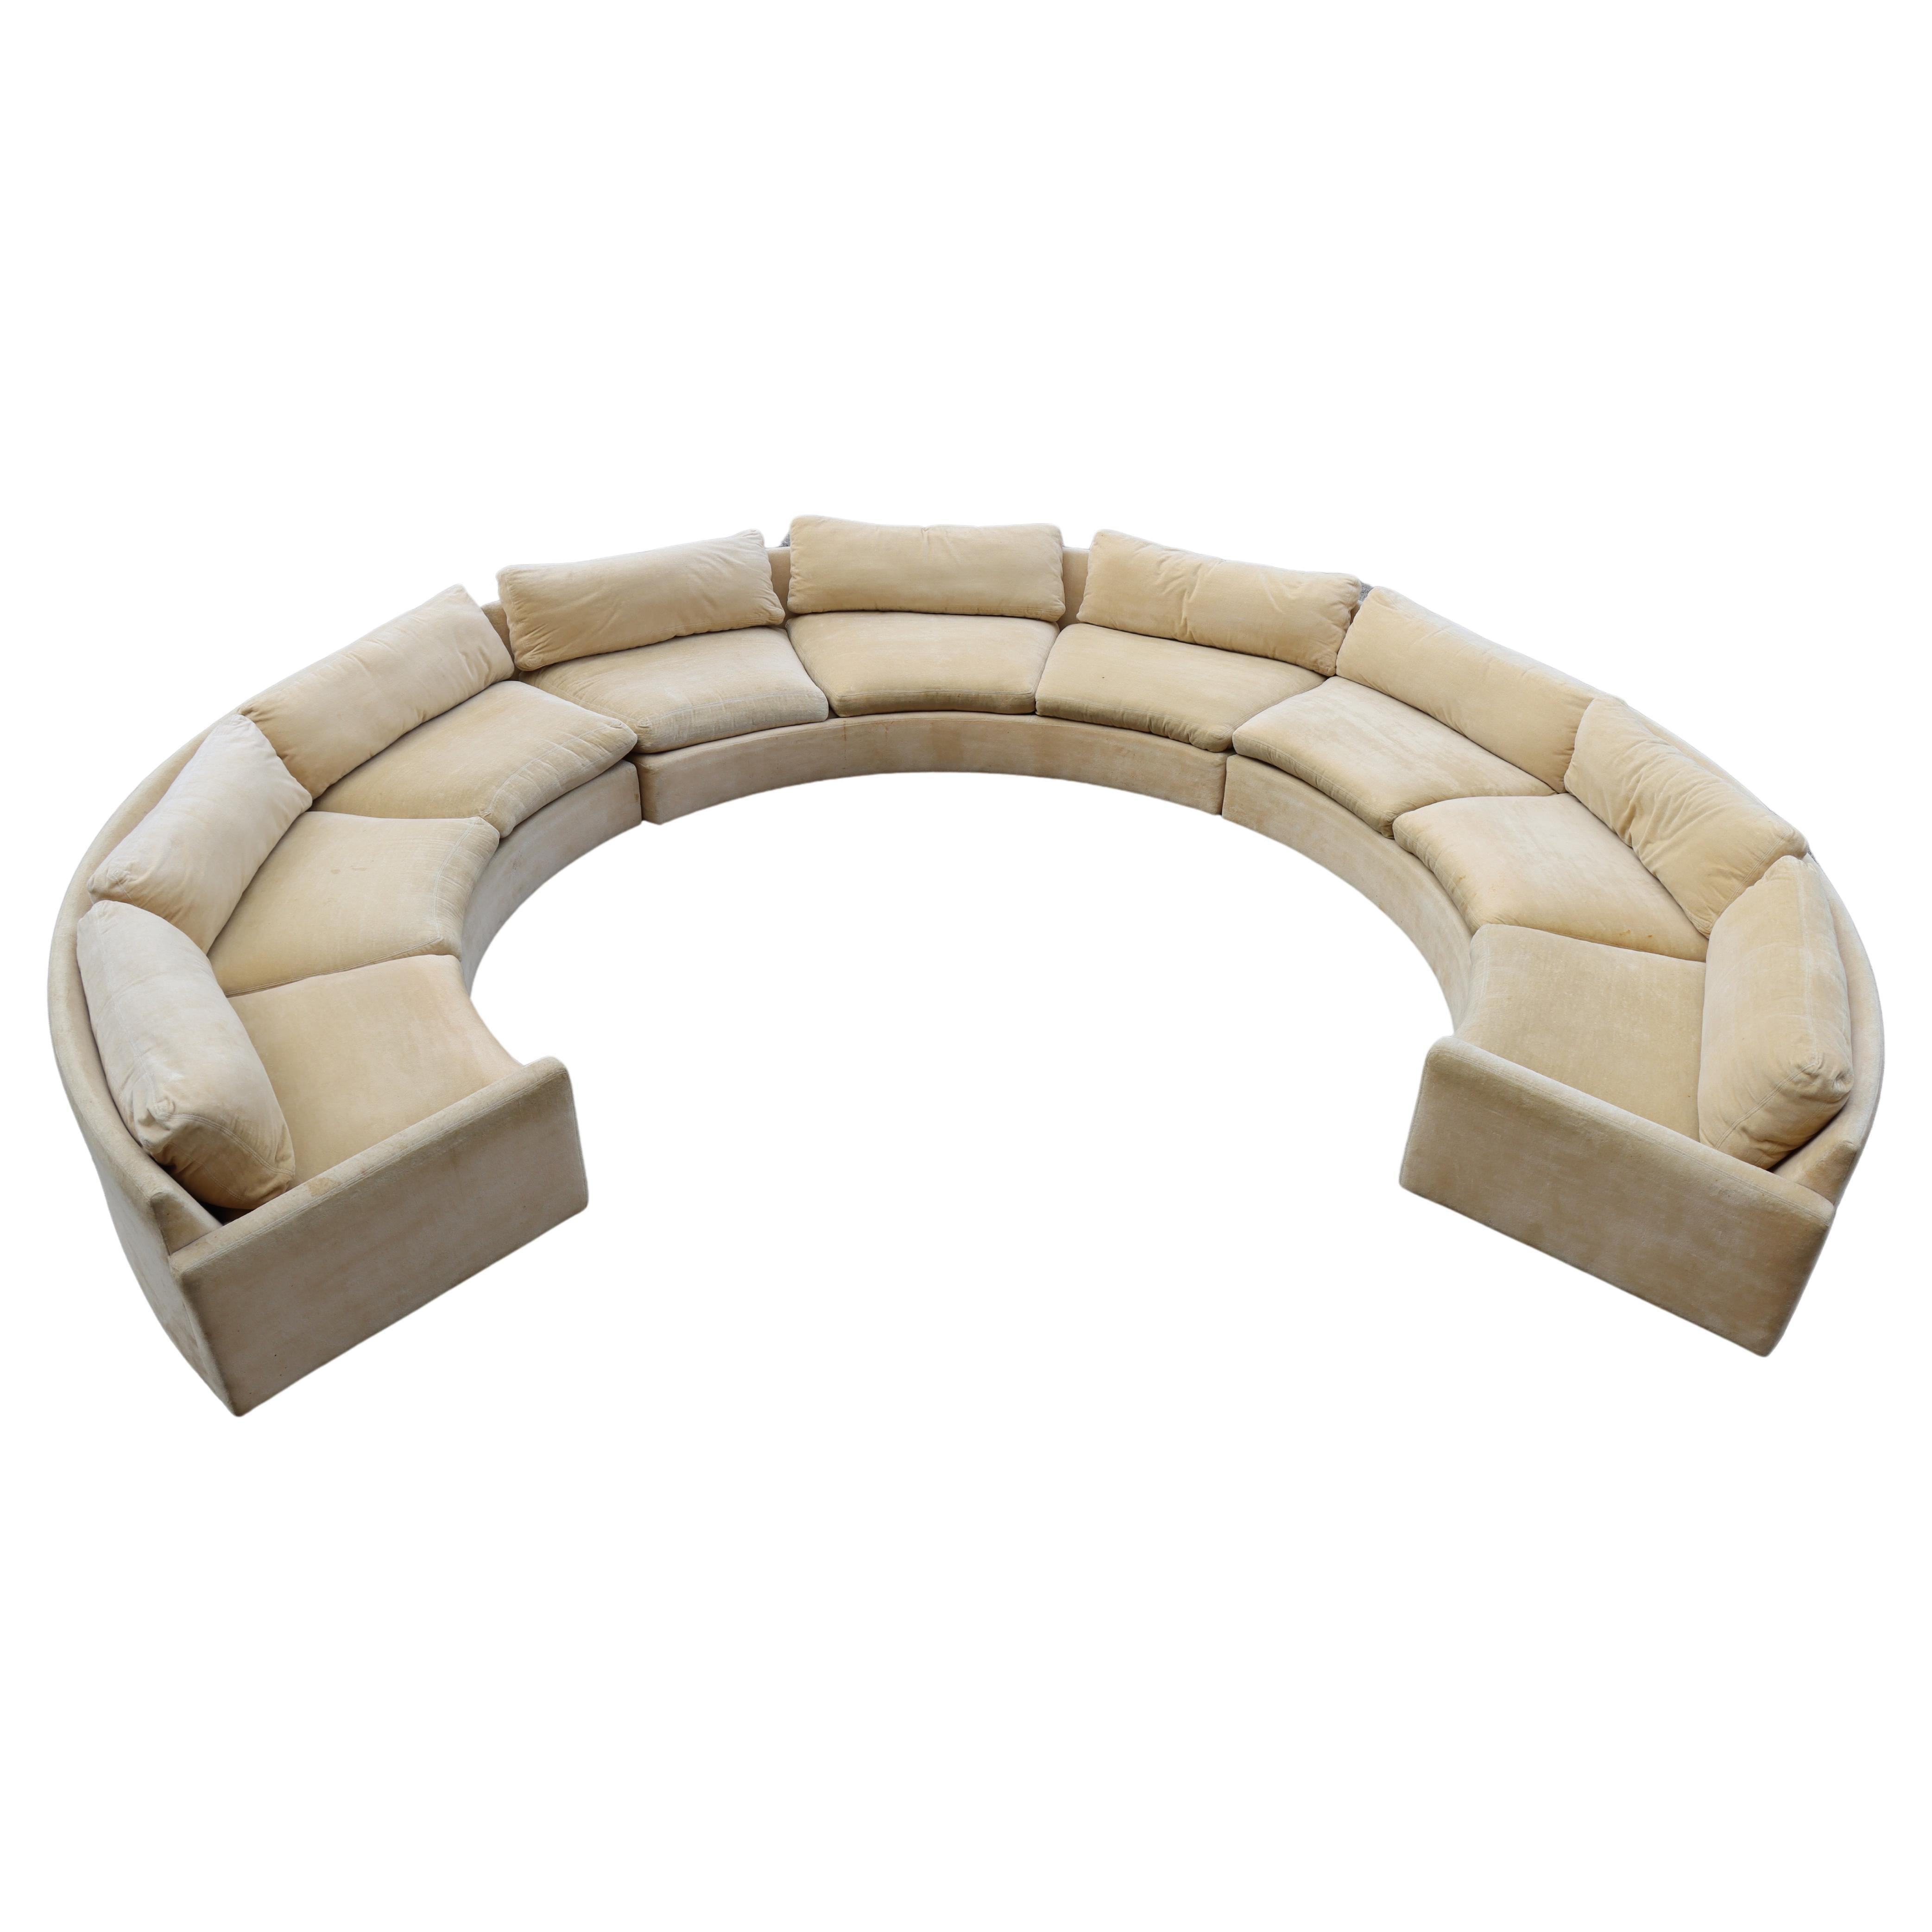 Large Semi-Circle Sectional by Milo Baughman for Thayer Coggin, 1970s